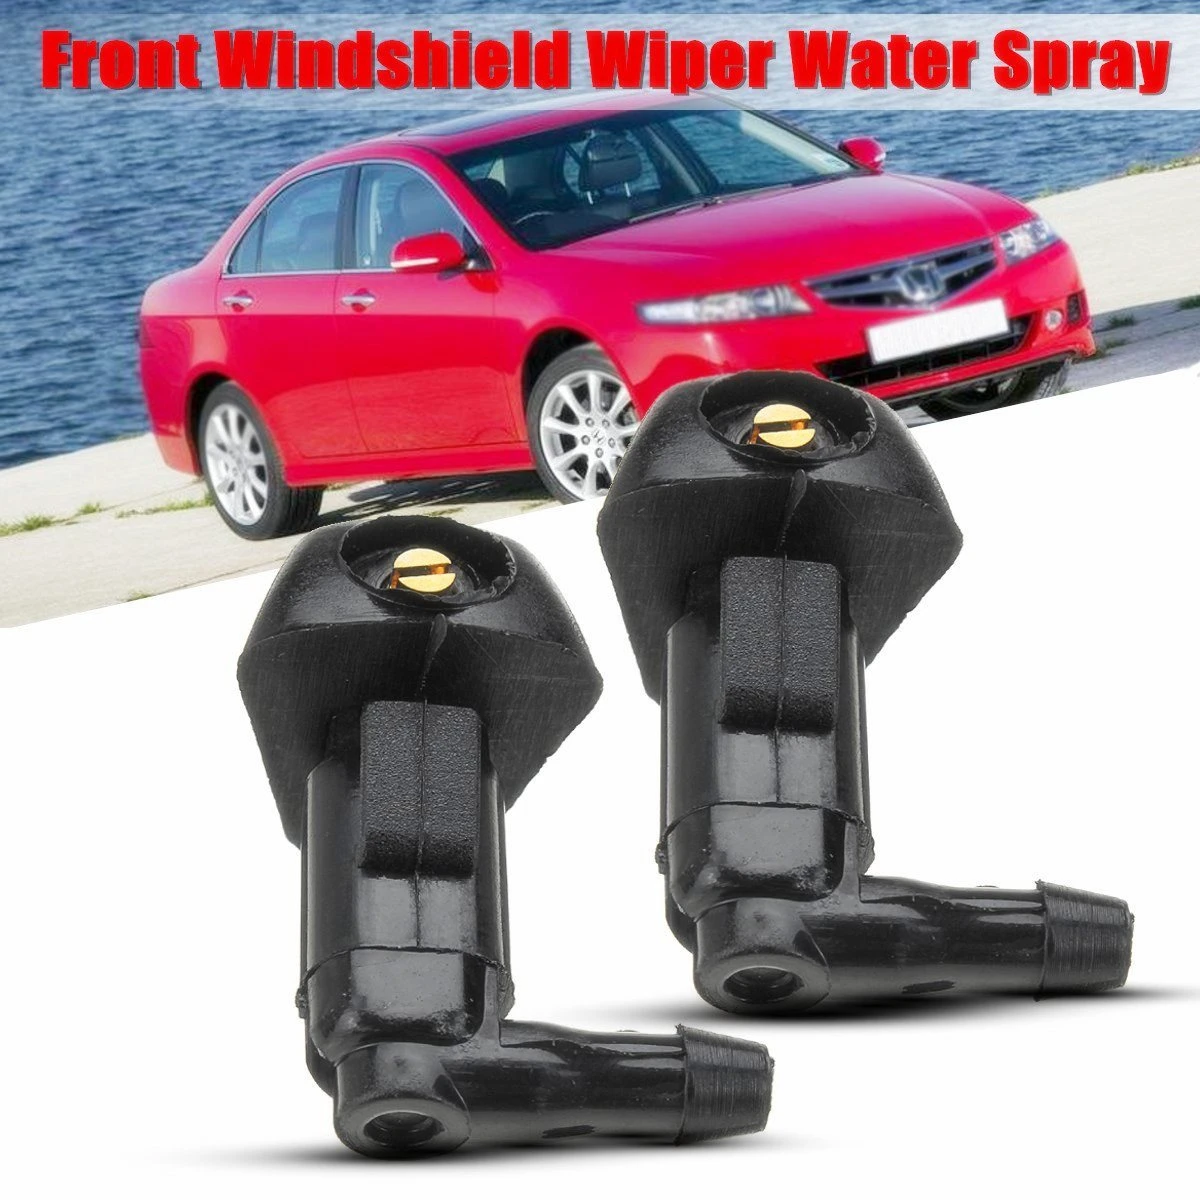 2Pcs Car Windshield Wiper Water Spray Jet Washer Nozzle For Honda /Accord 2003 2004 2005 2006 2007